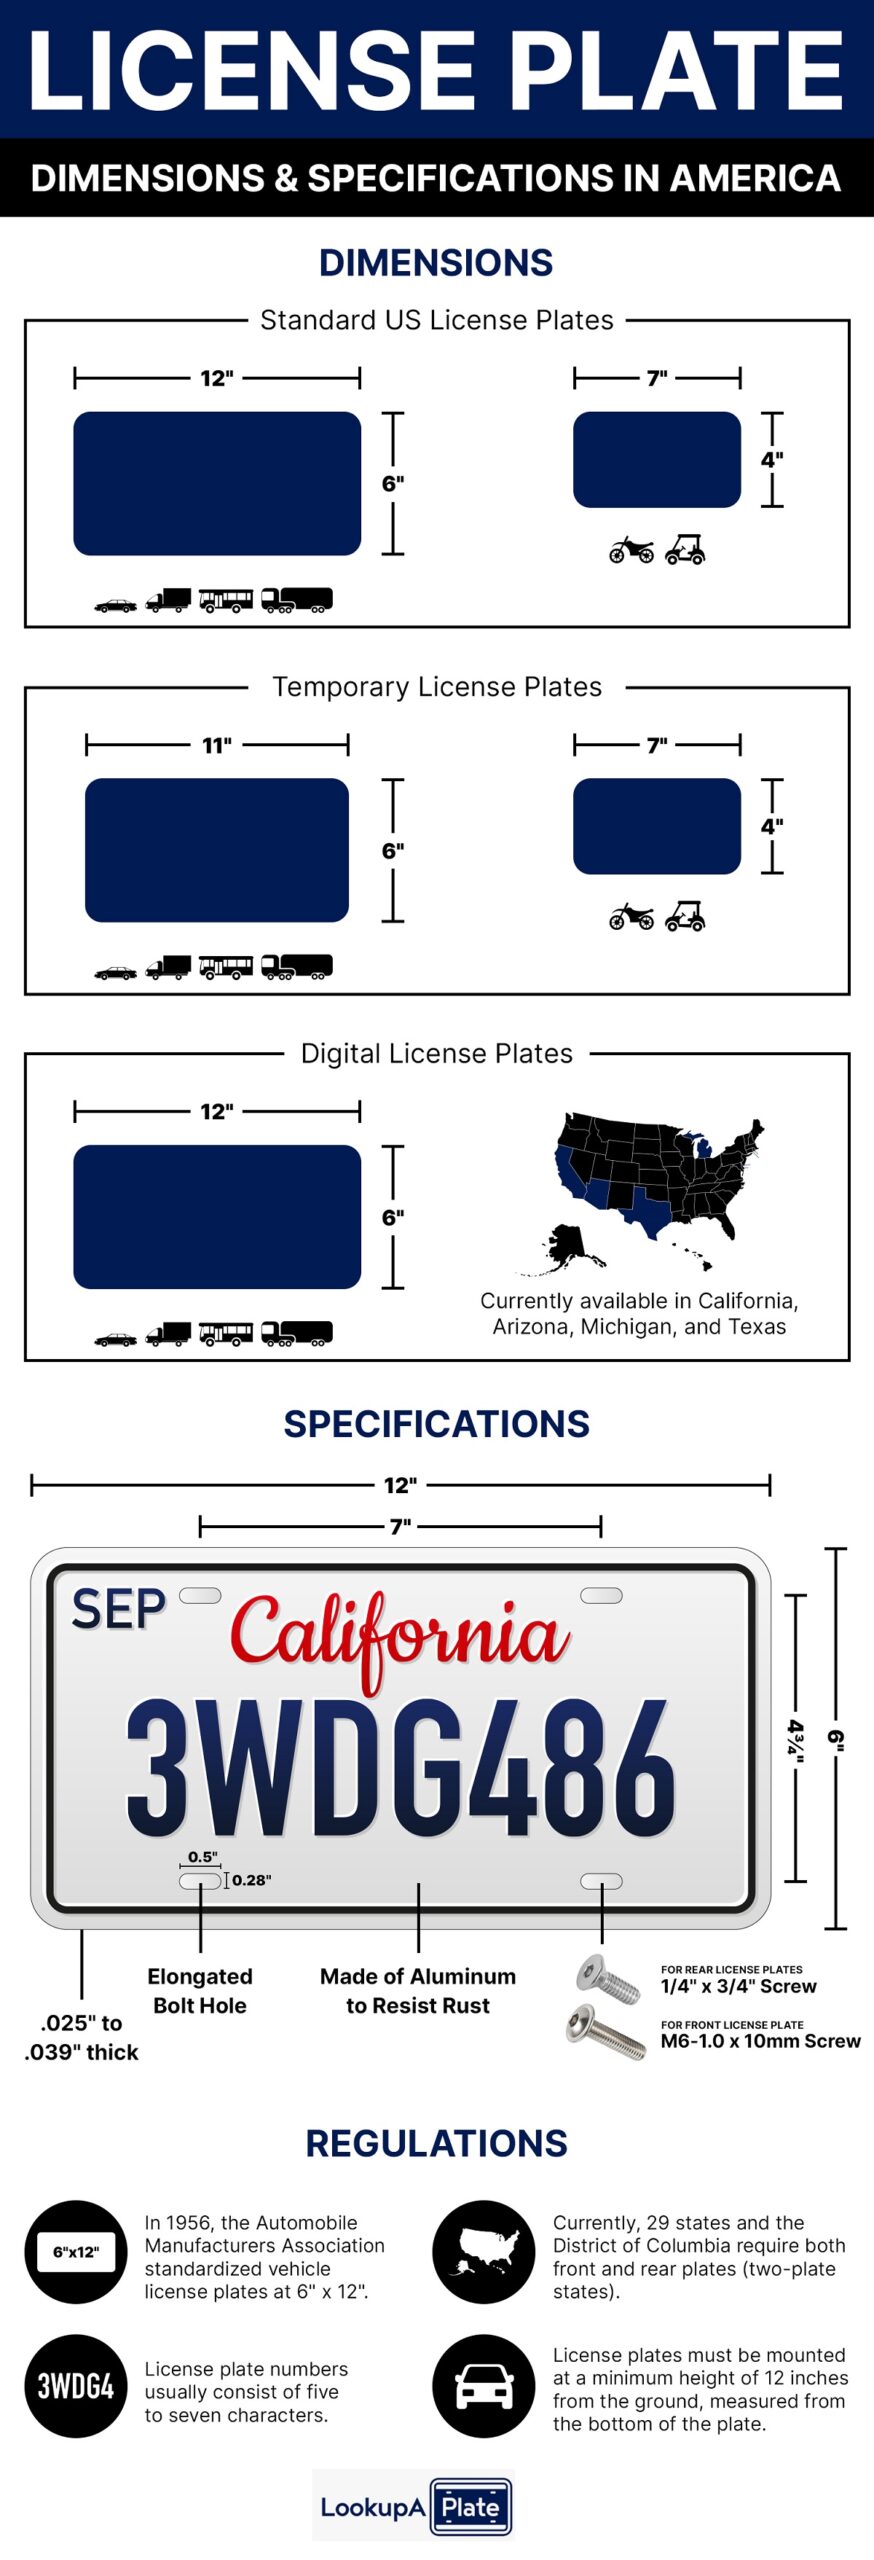 License Plate Dimensions and Specifications in America Infographics